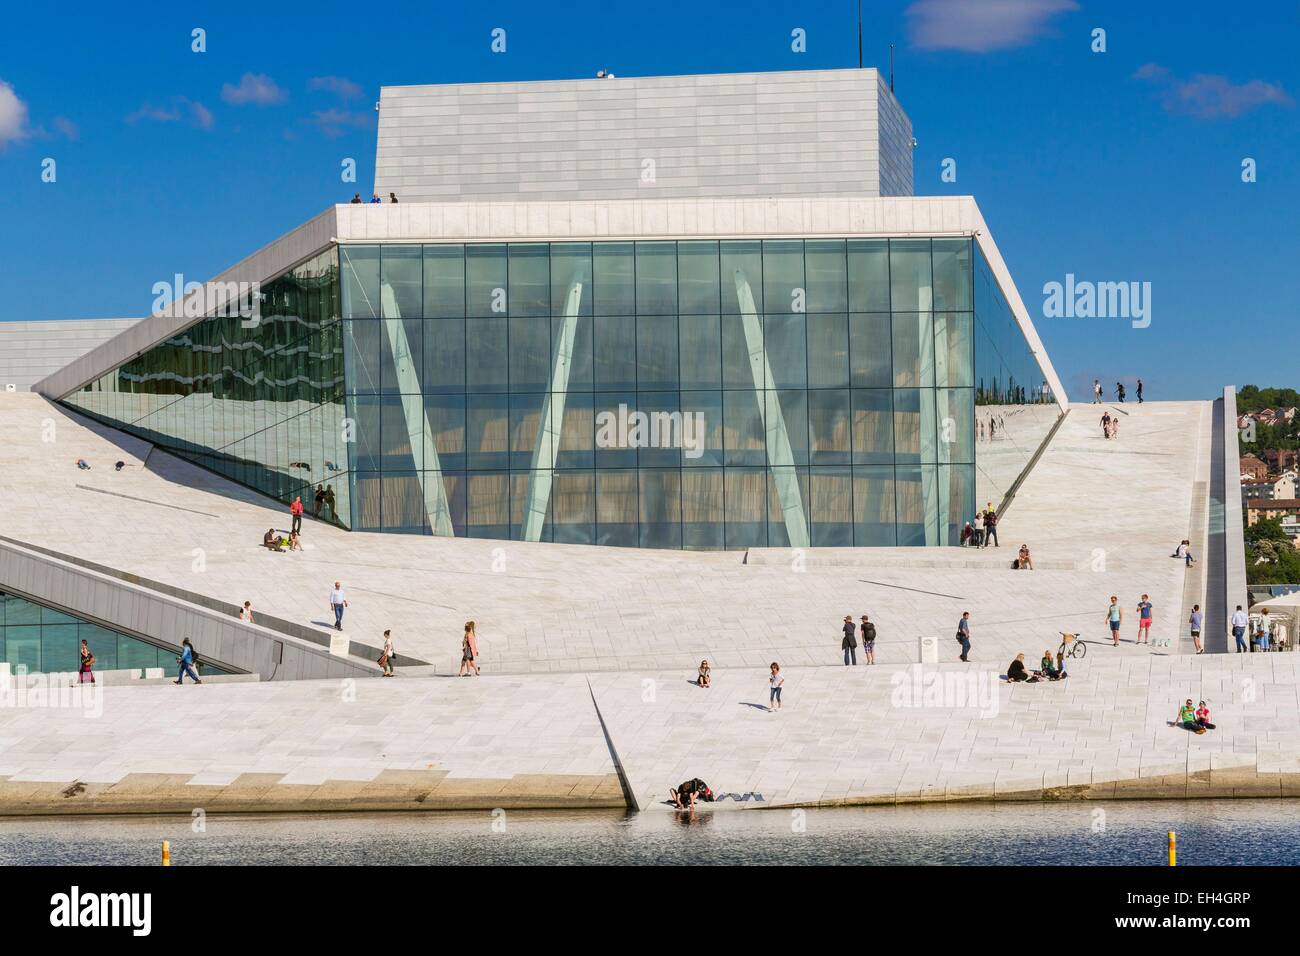 Norway, Oslo, Bj°rvika district, Opera House by the fjord, marble building designed by the Norwegian architectural firm Sn°hetta and inaugurated in 2008 Stock Photo